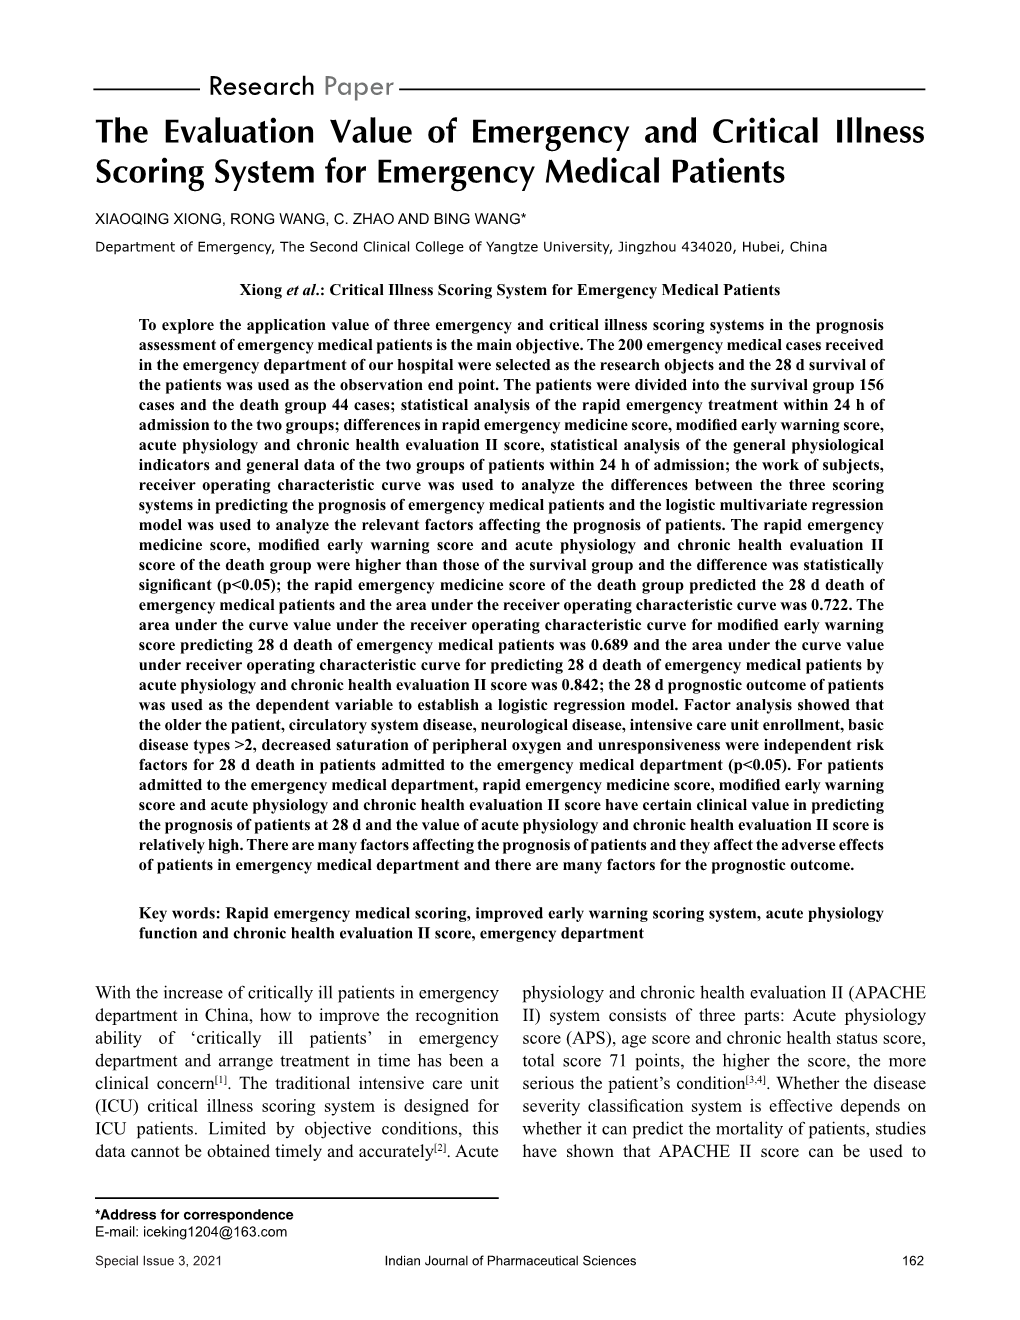 The Evaluation Value of Emergency and Critical Illness Scoring System for Emergency Medical Patients